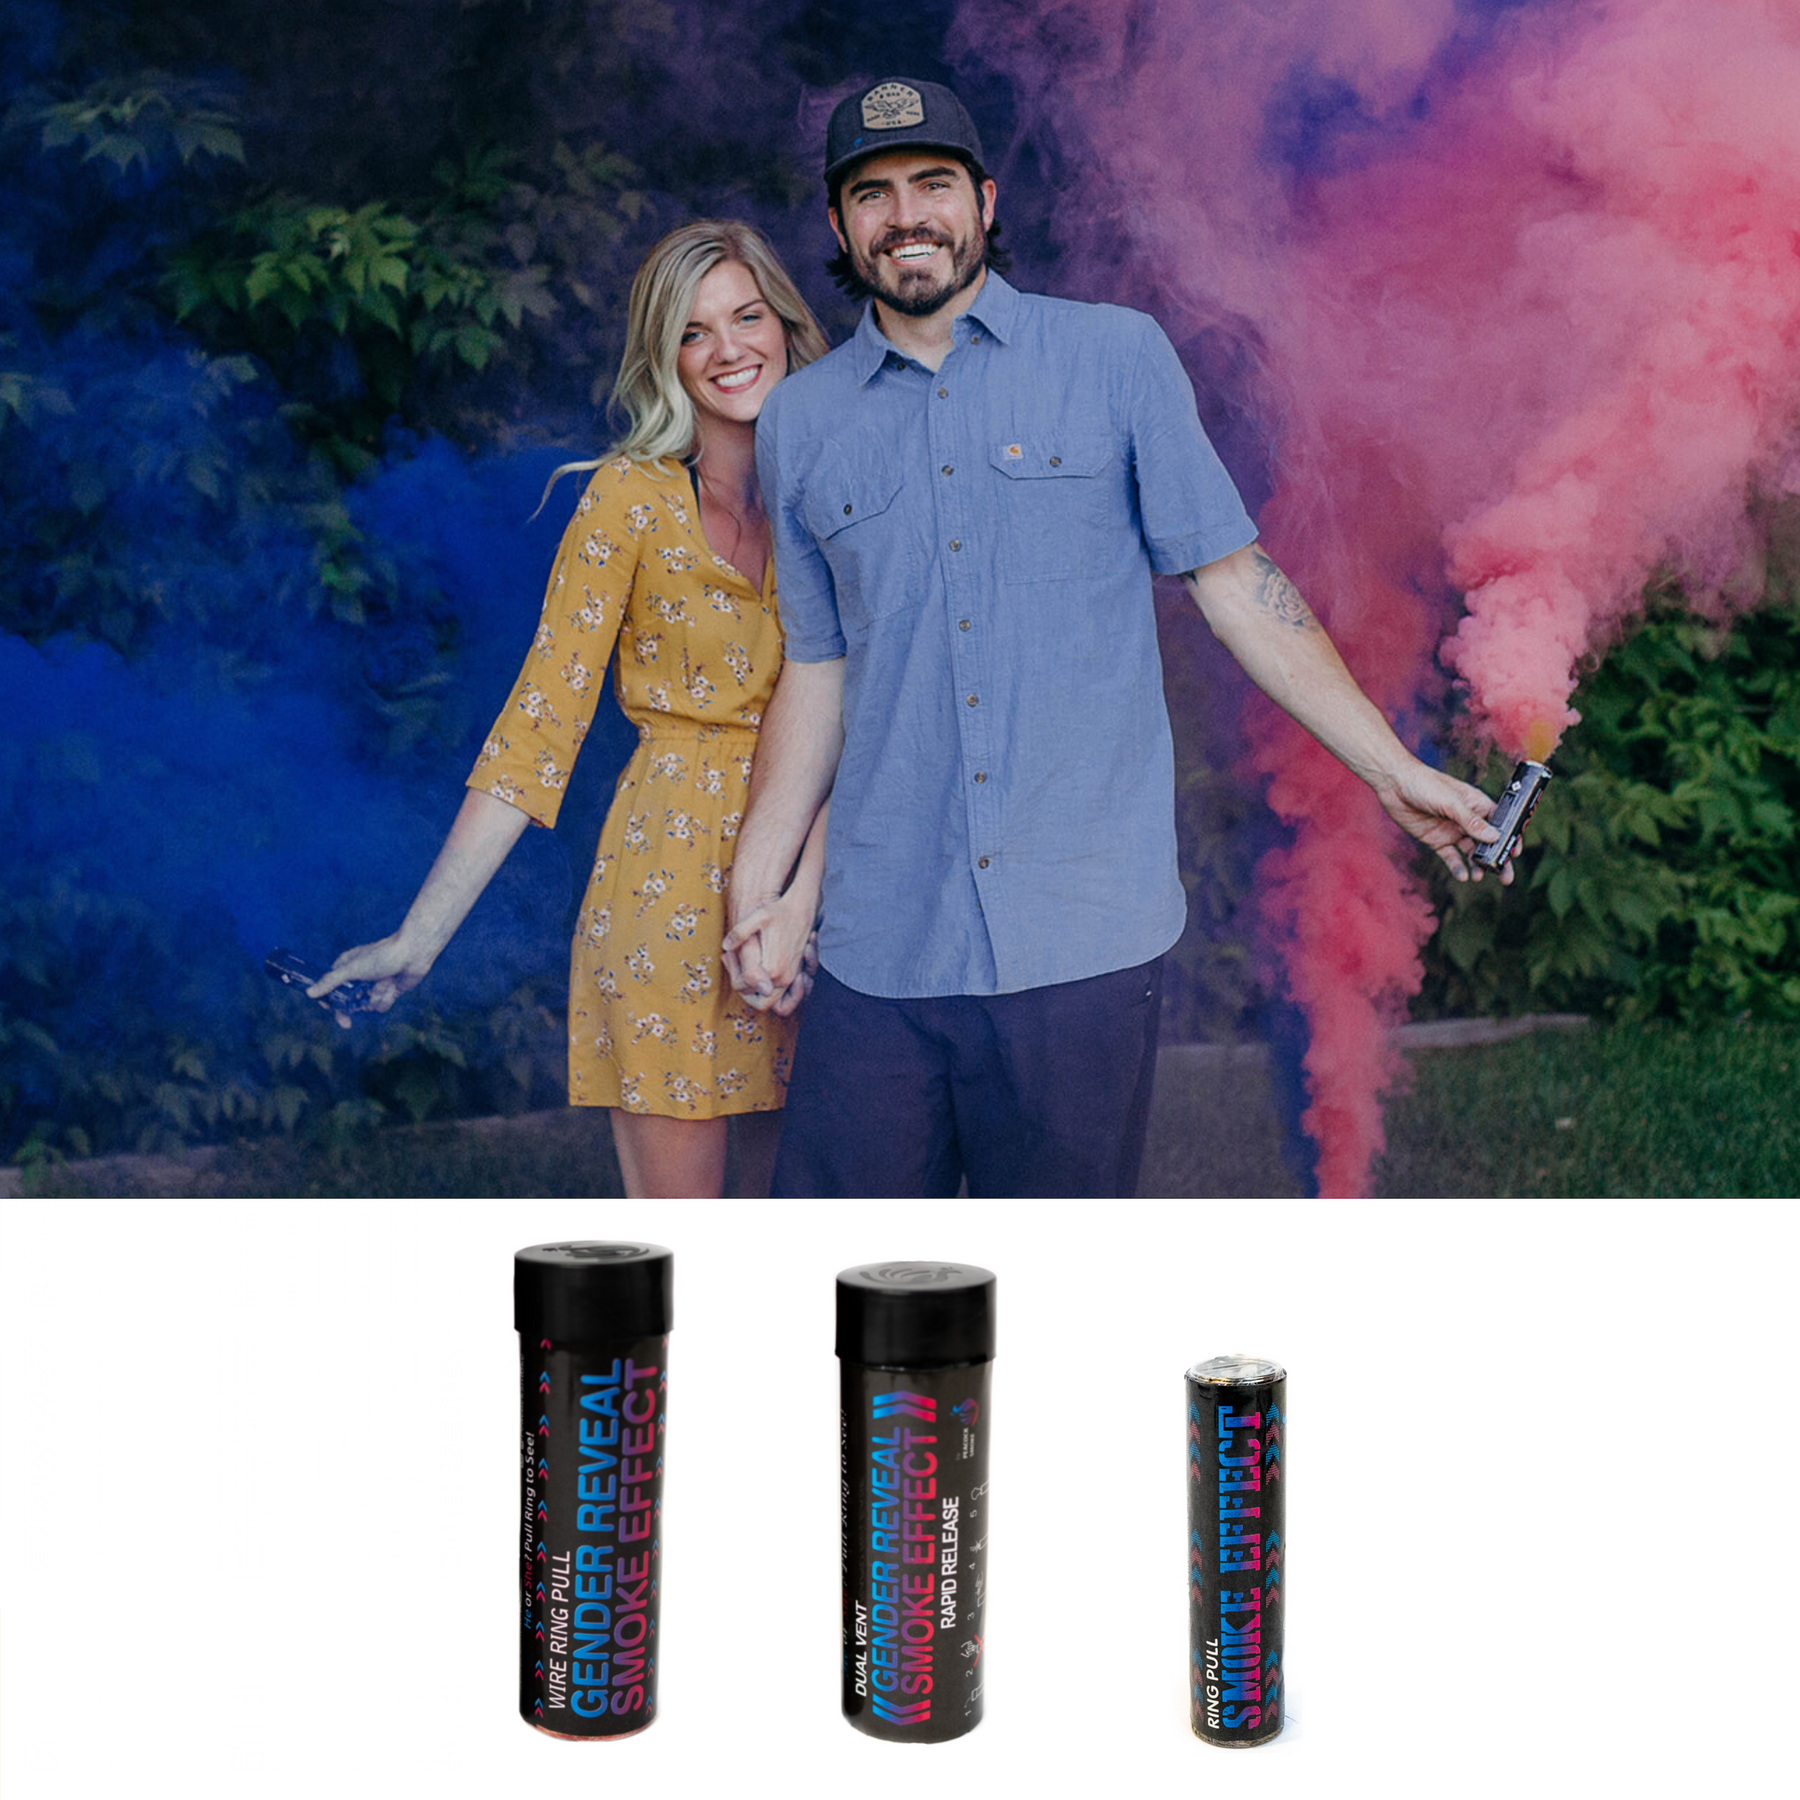 RING PULL 90 SECOND SMOKE BOMBS – Peacock Sparklers